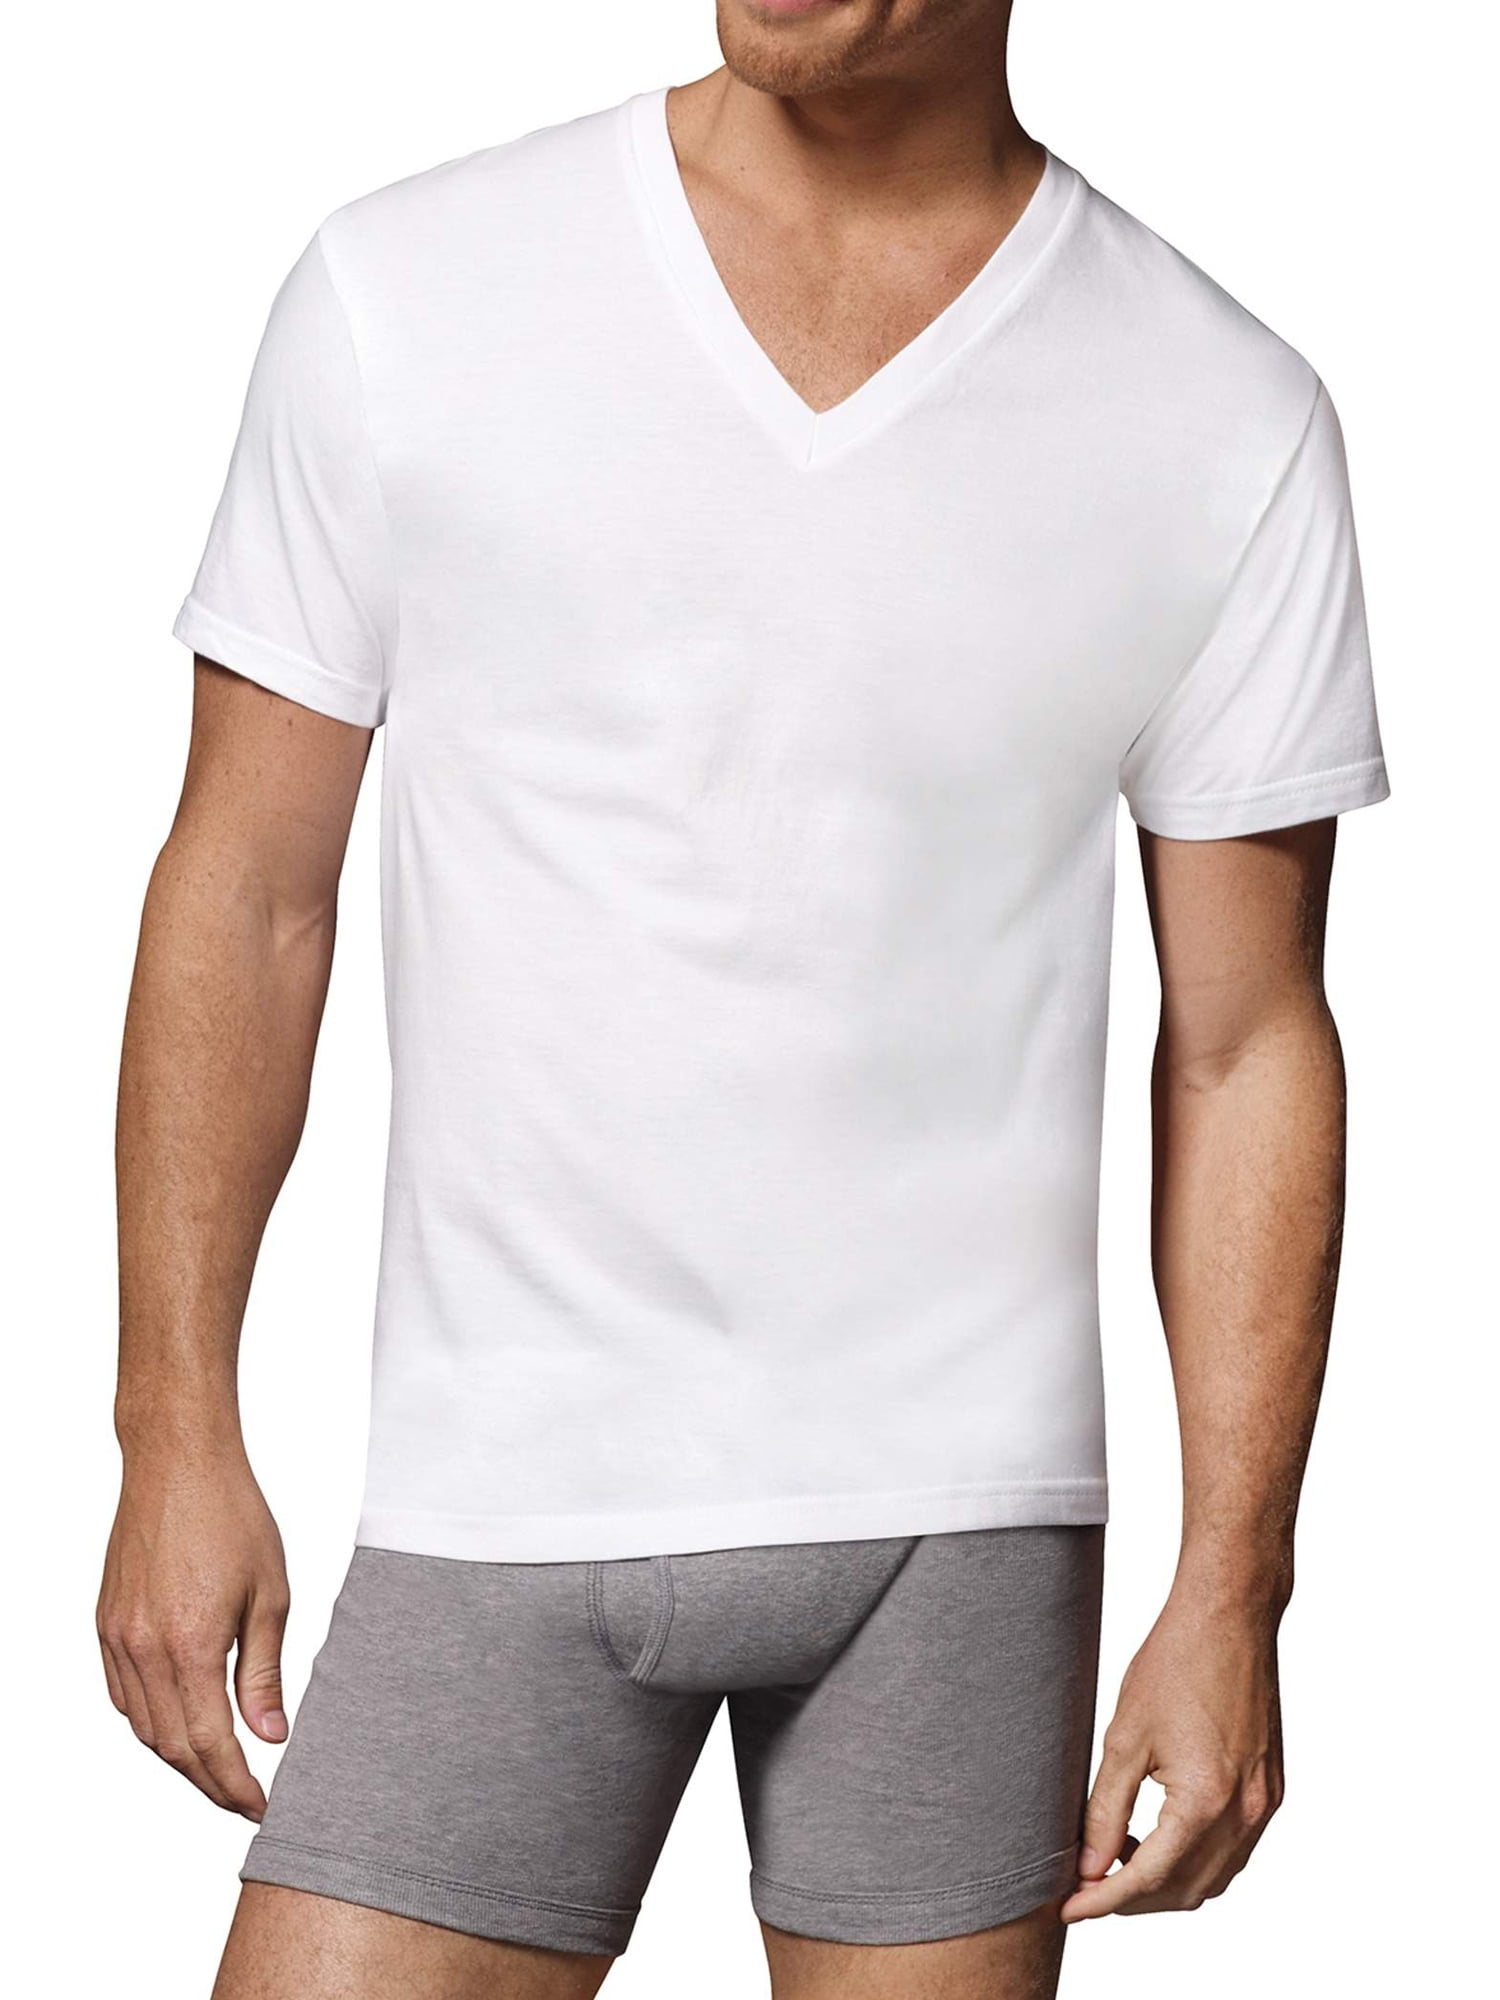 Details about   Lot Of 5 Mens Hanes V-neck Comfortsoft White Cotton T-Shirt SS Loose S Small 